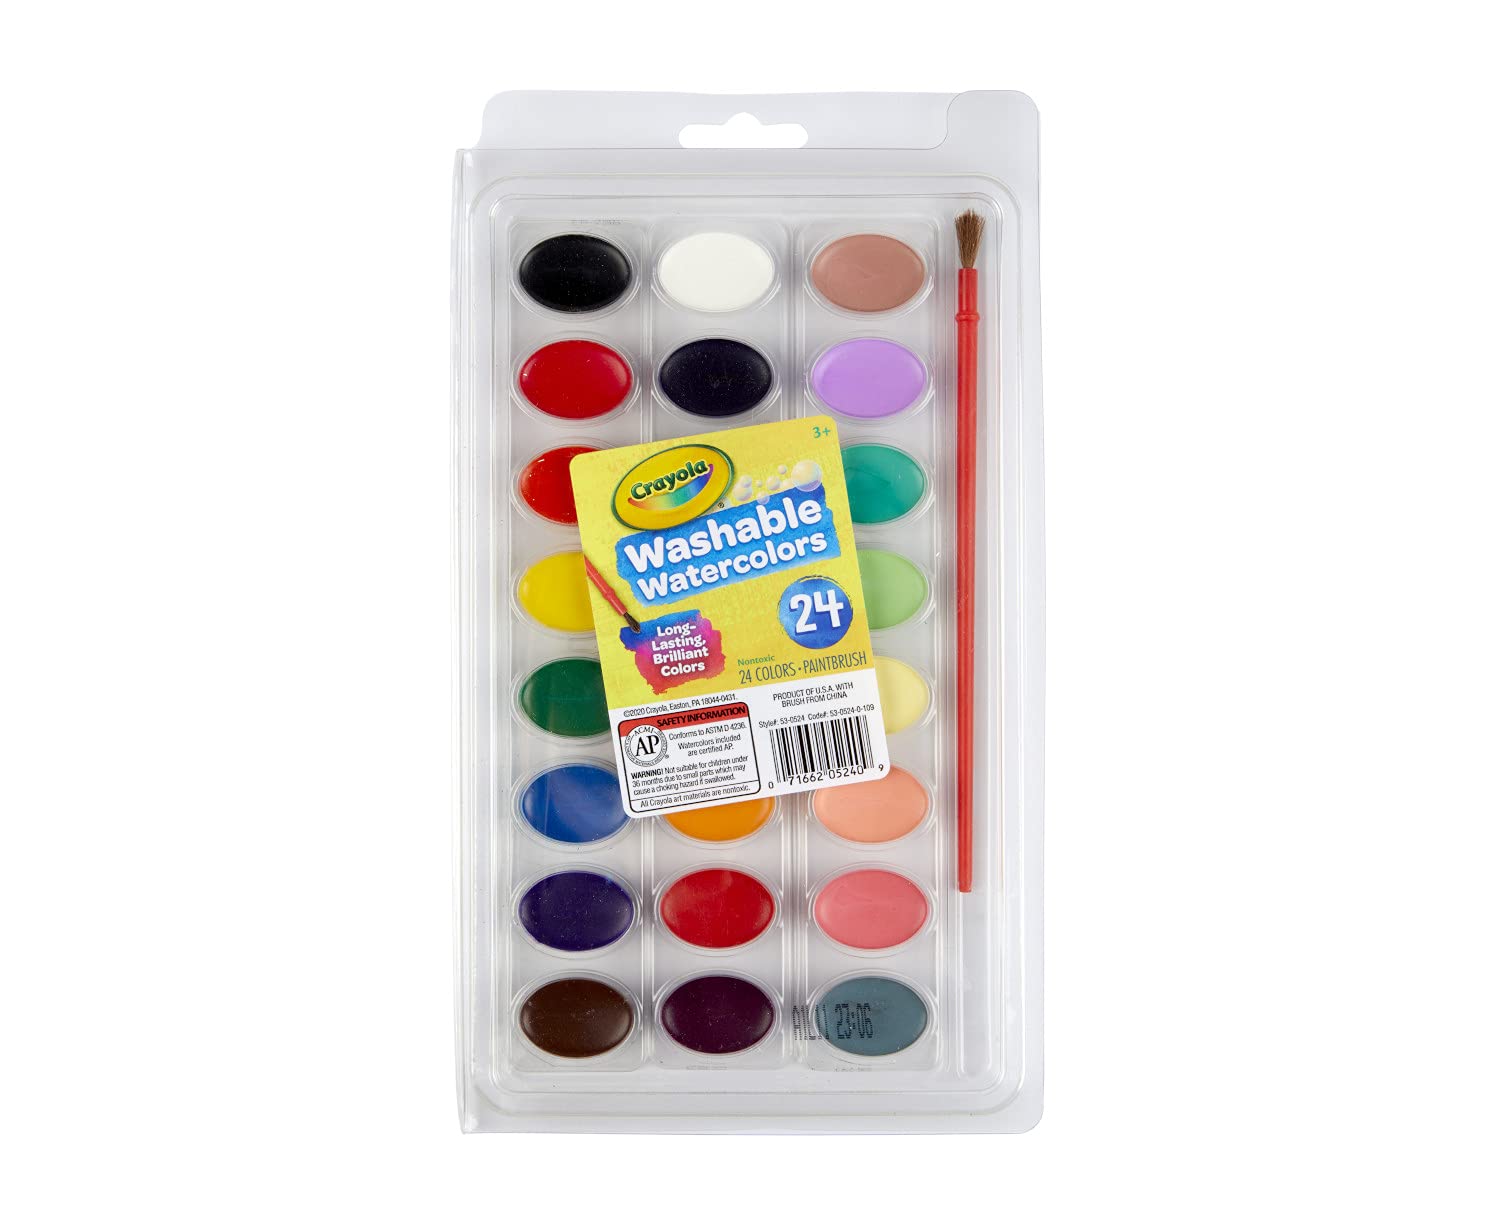 Crayola Washable Watercolors, Paint Set for Kids, Gift, 24 Count